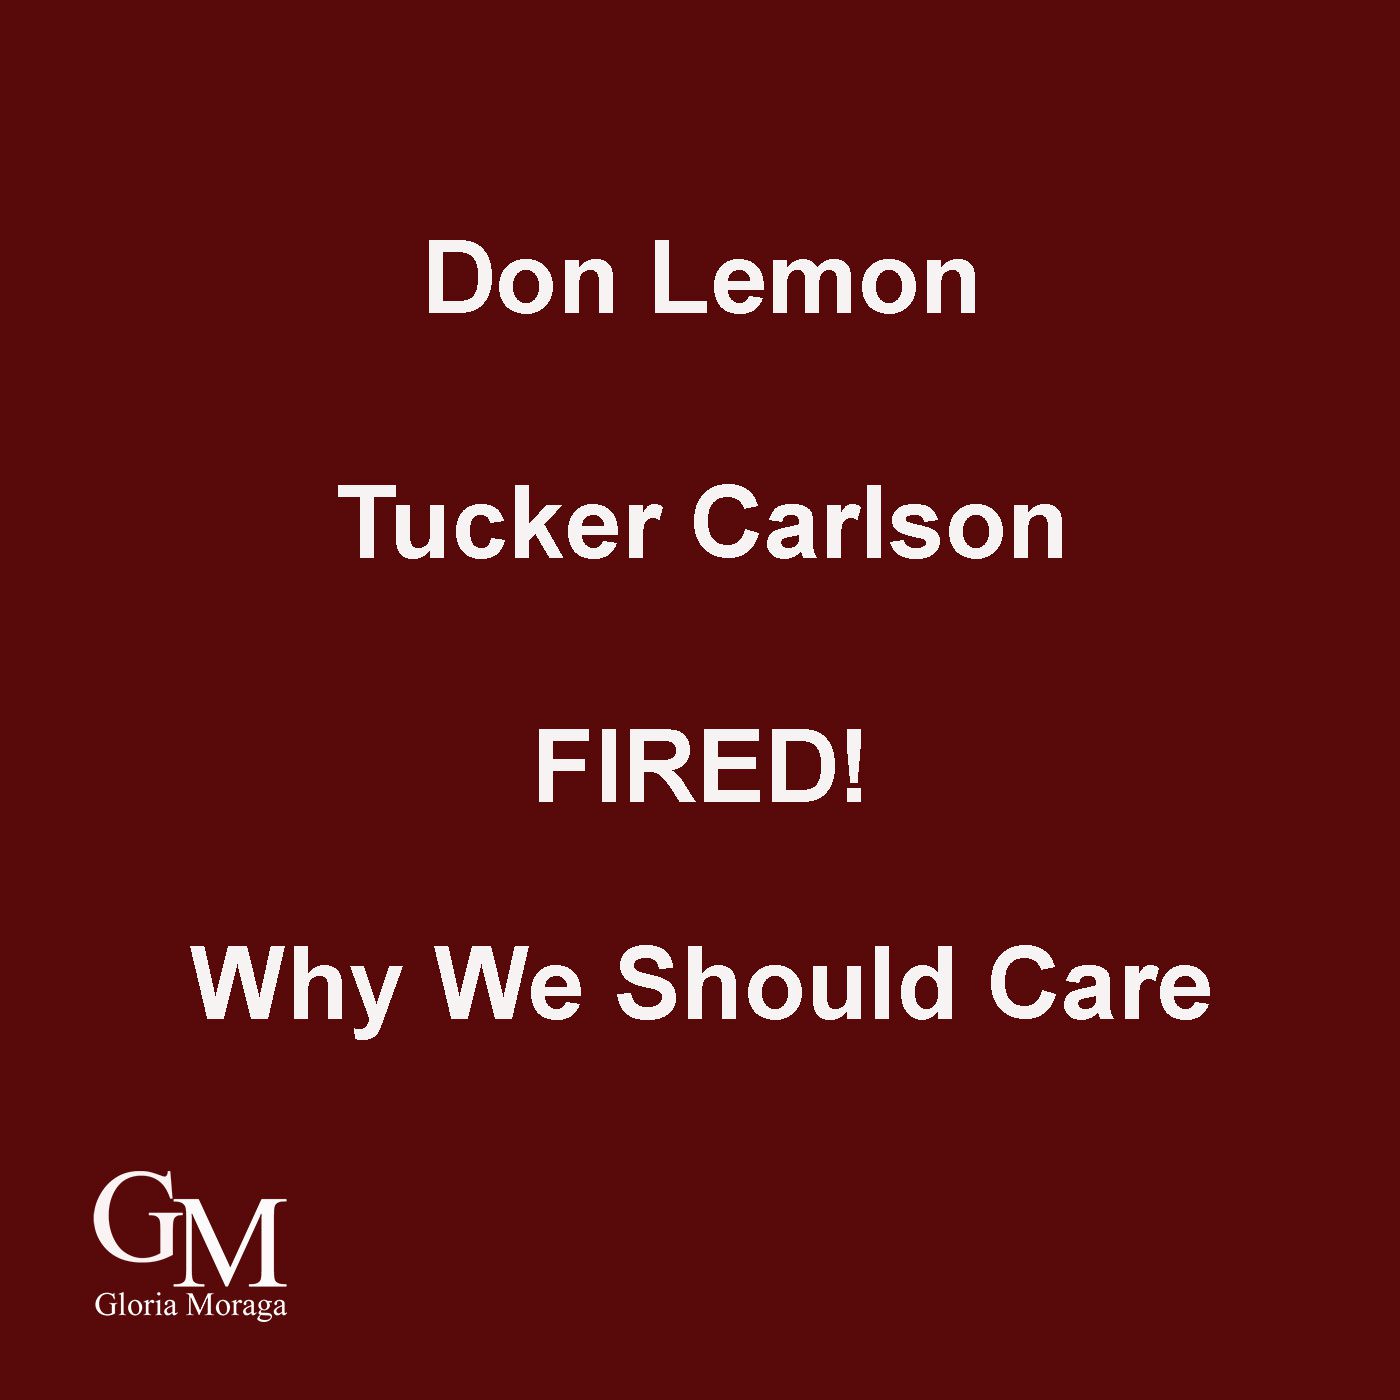 Don Lemon Tucker Carlson Fired. Why we Should Care